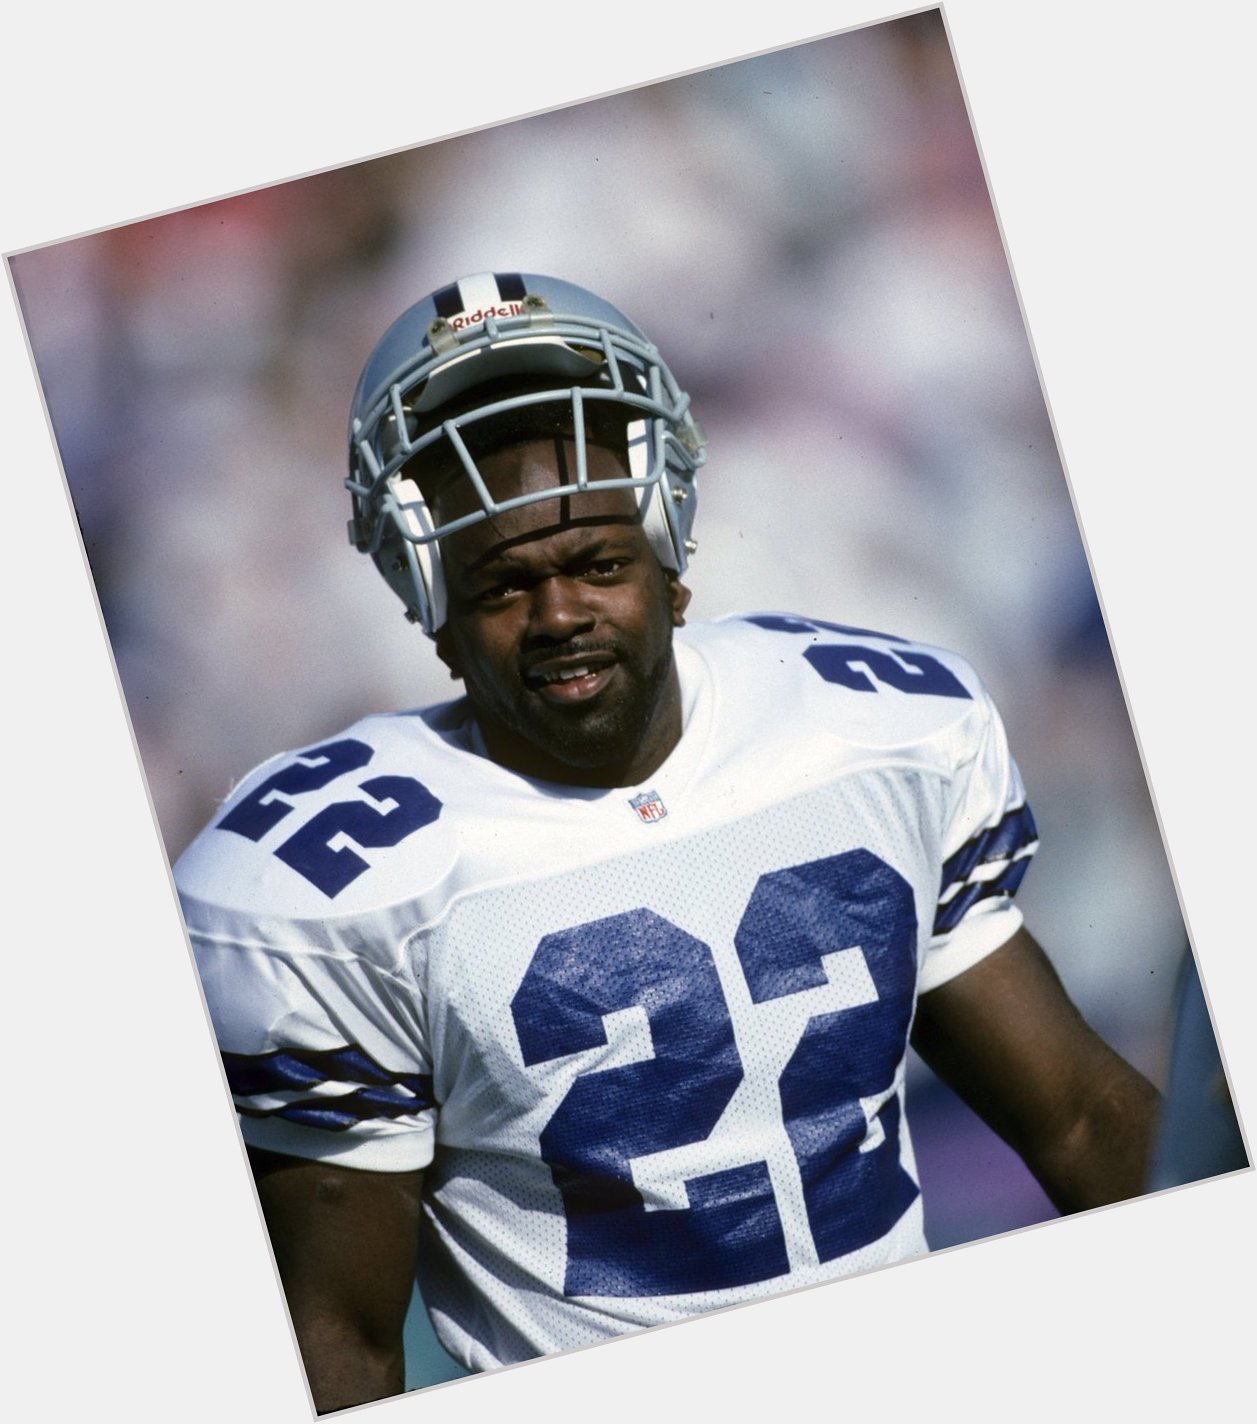 Happy birthday to Hall of Fame Running back and Dallas Cowboy great Emmitt Smith! 